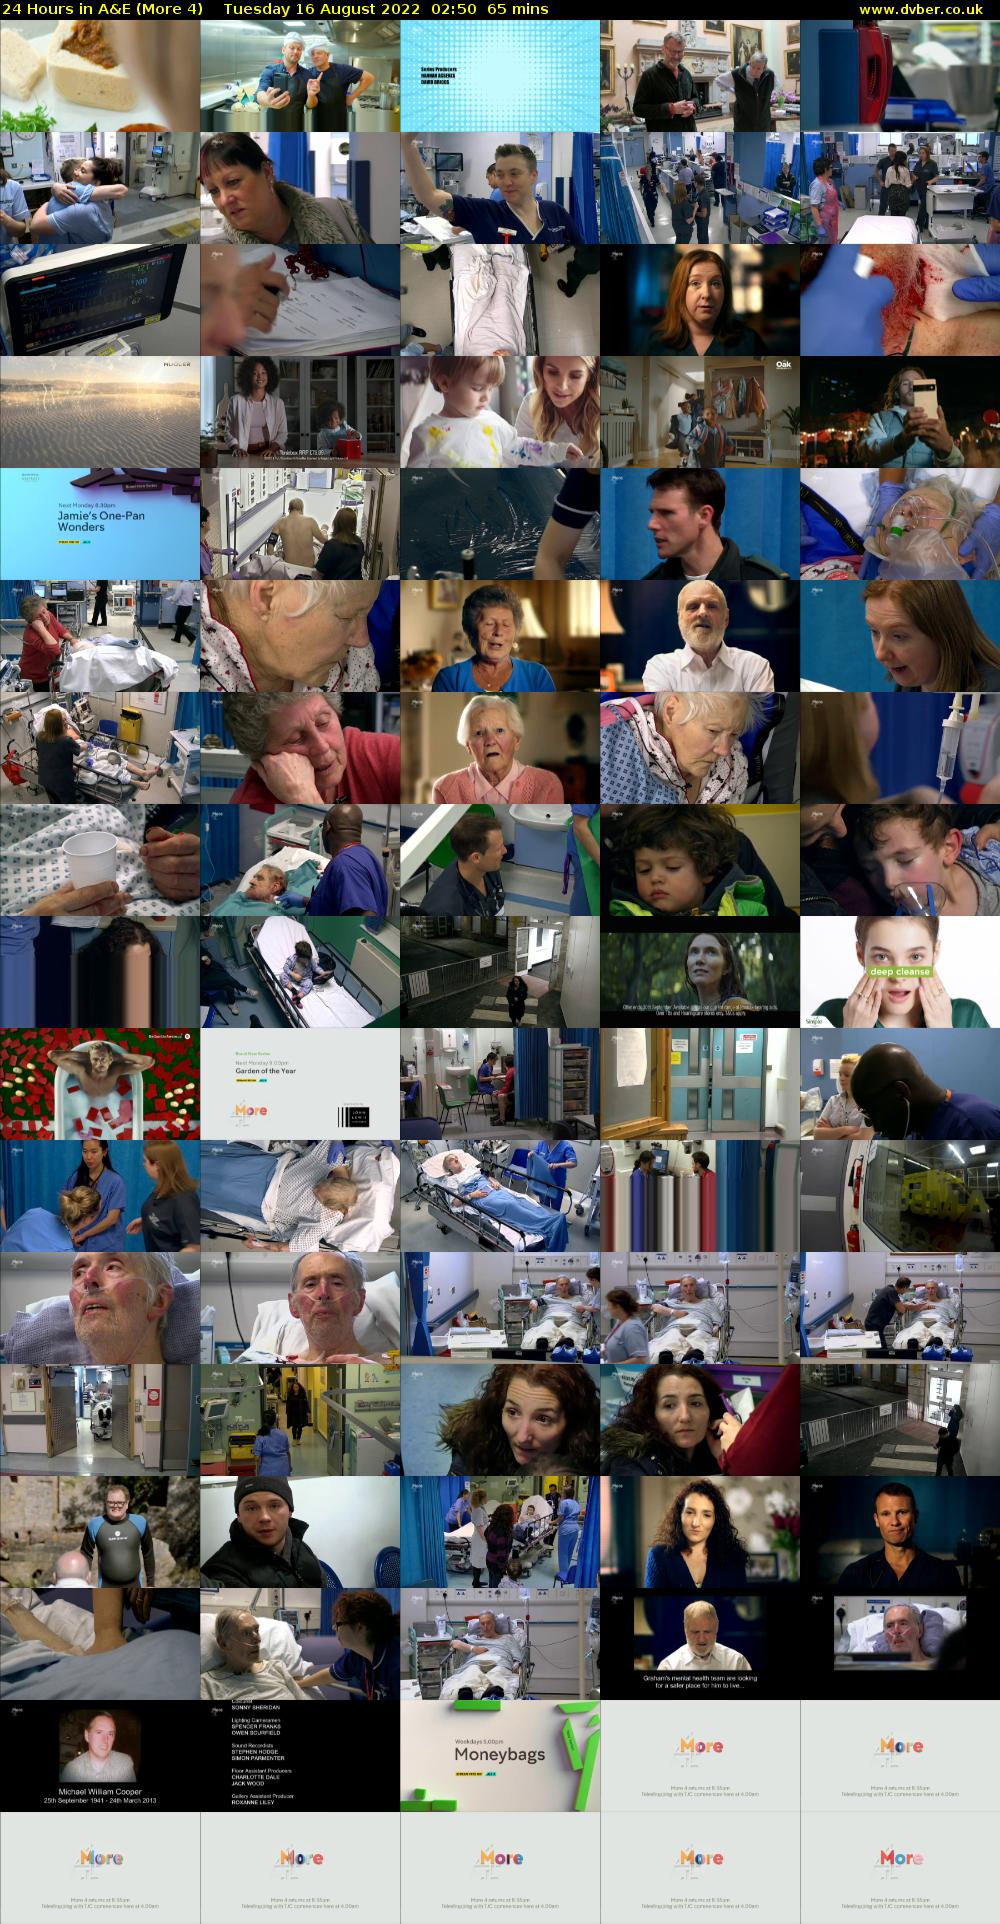 24 Hours in A&E (More 4) Tuesday 16 August 2022 02:50 - 03:55